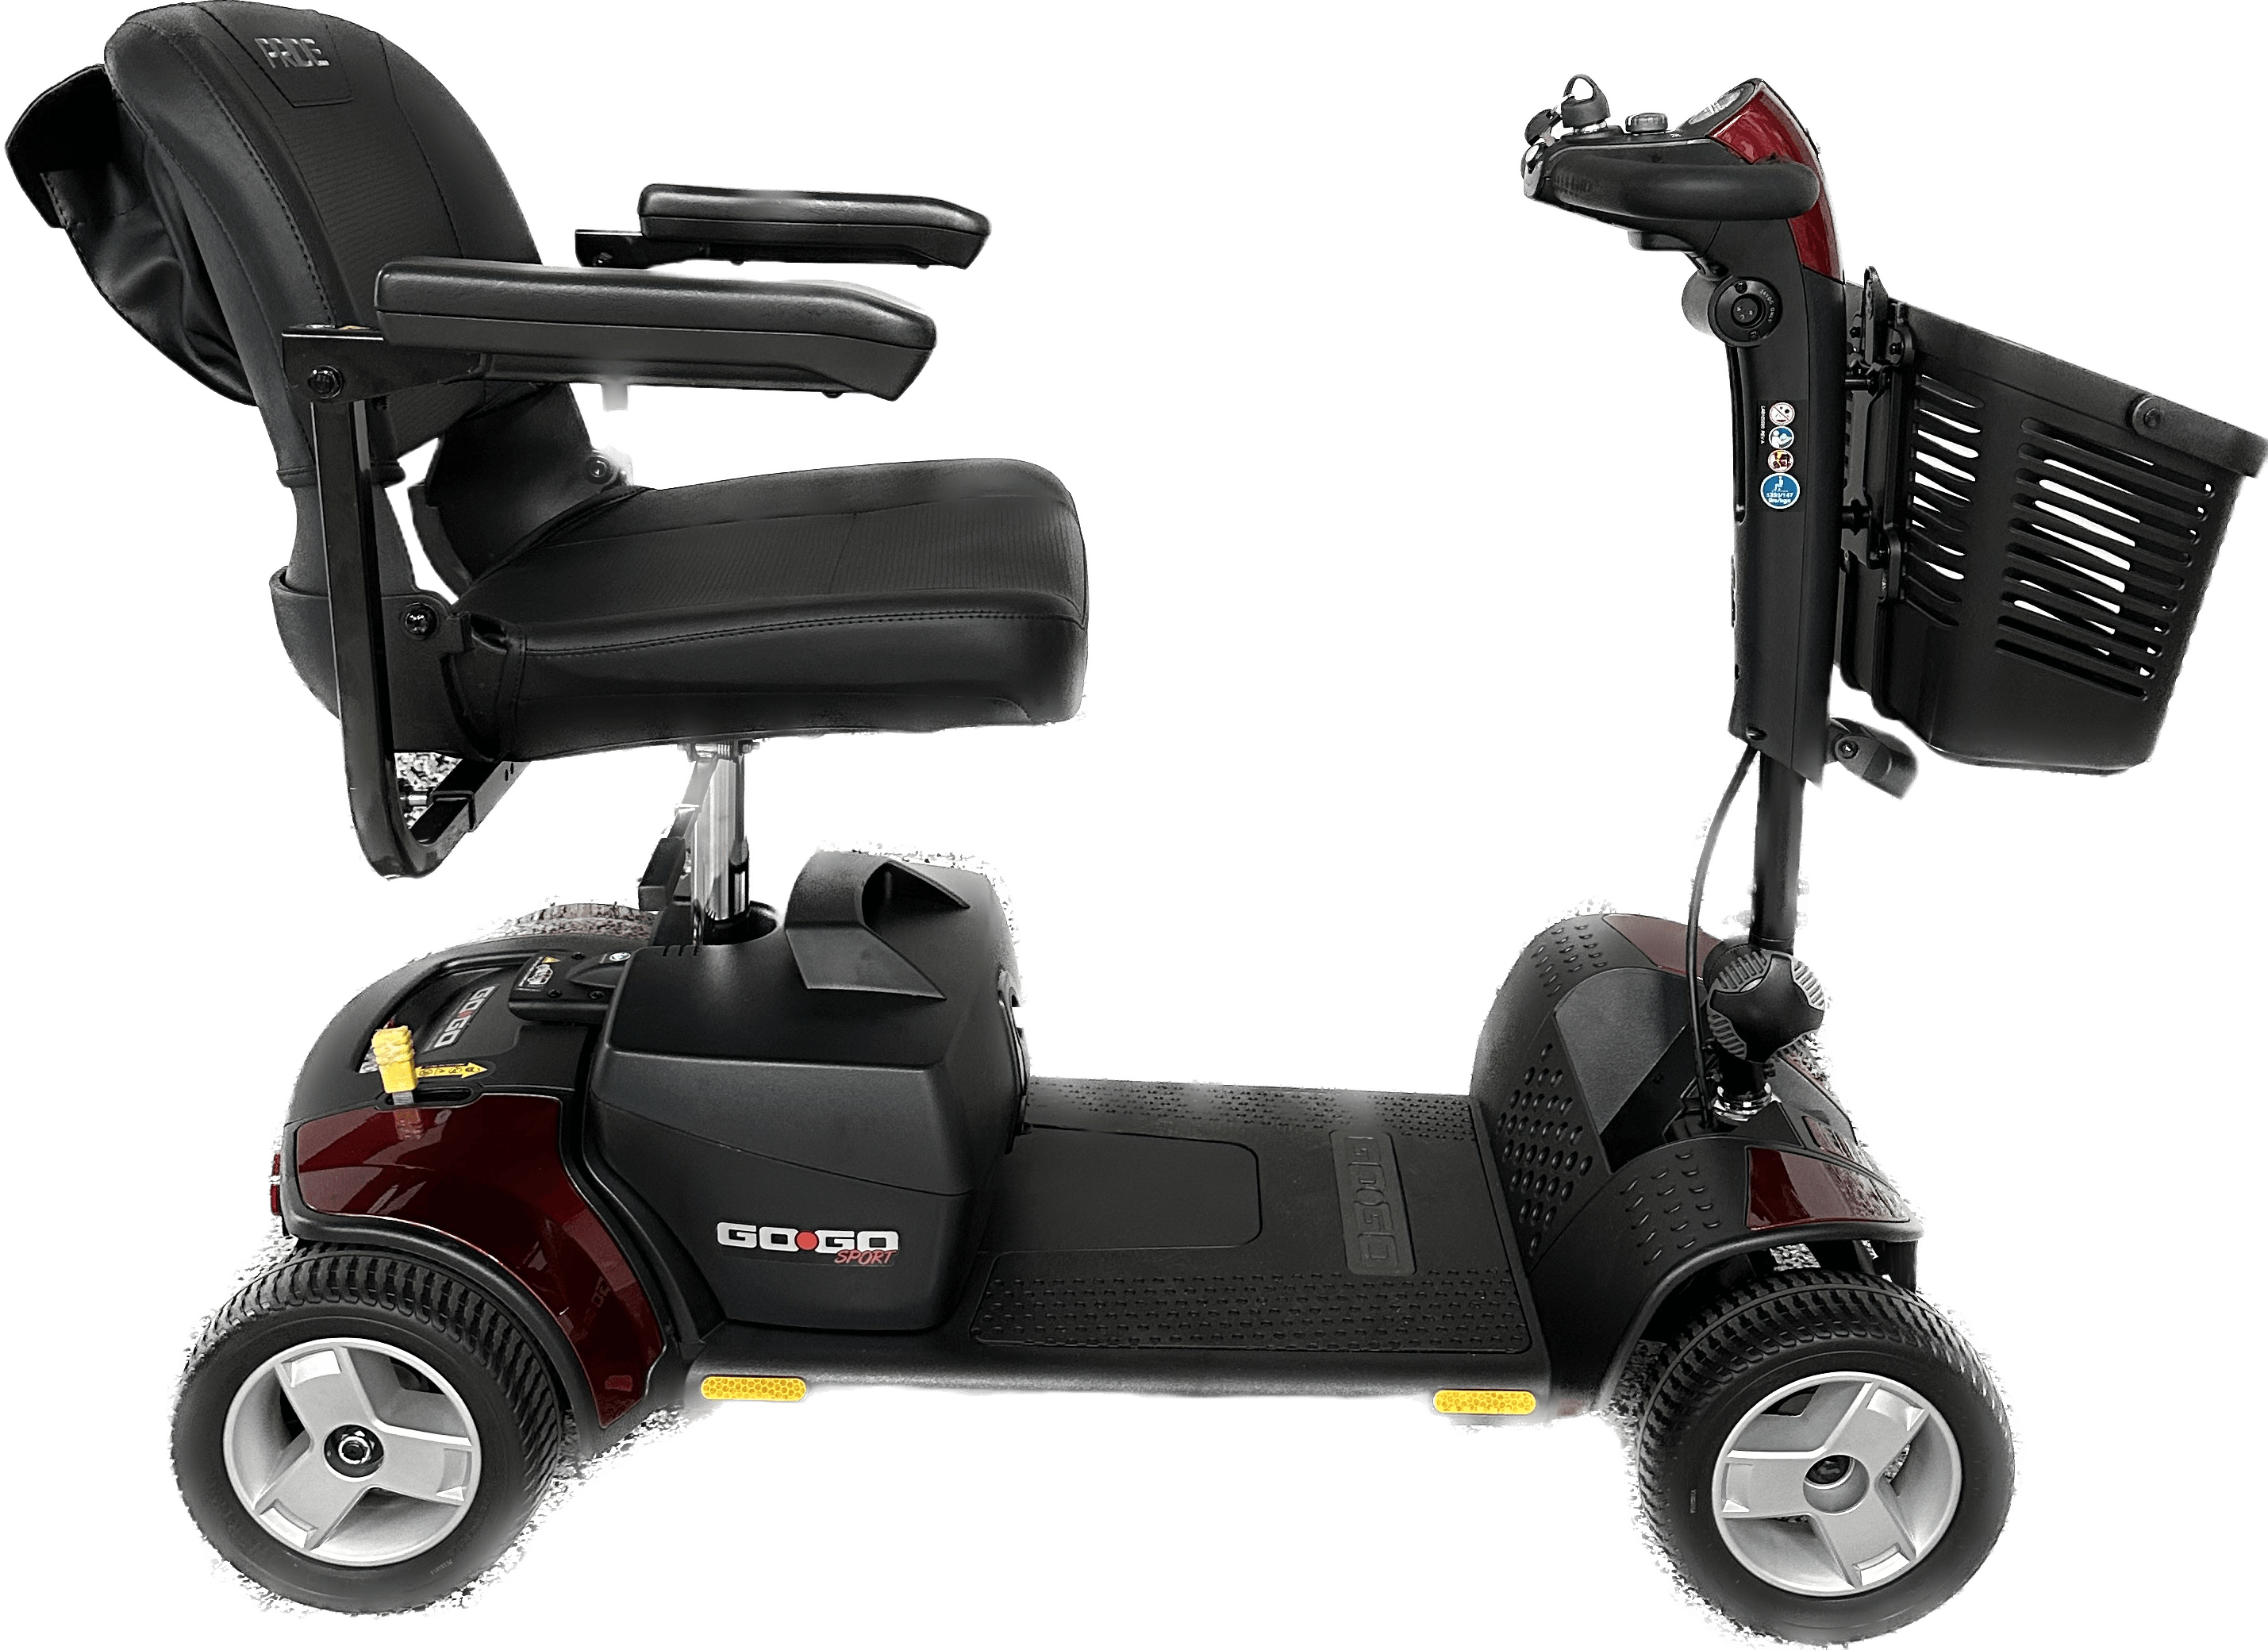 Multiday Mobility & ECV Travel Scooter Rental 300 Pound Capacity (3 or more days)